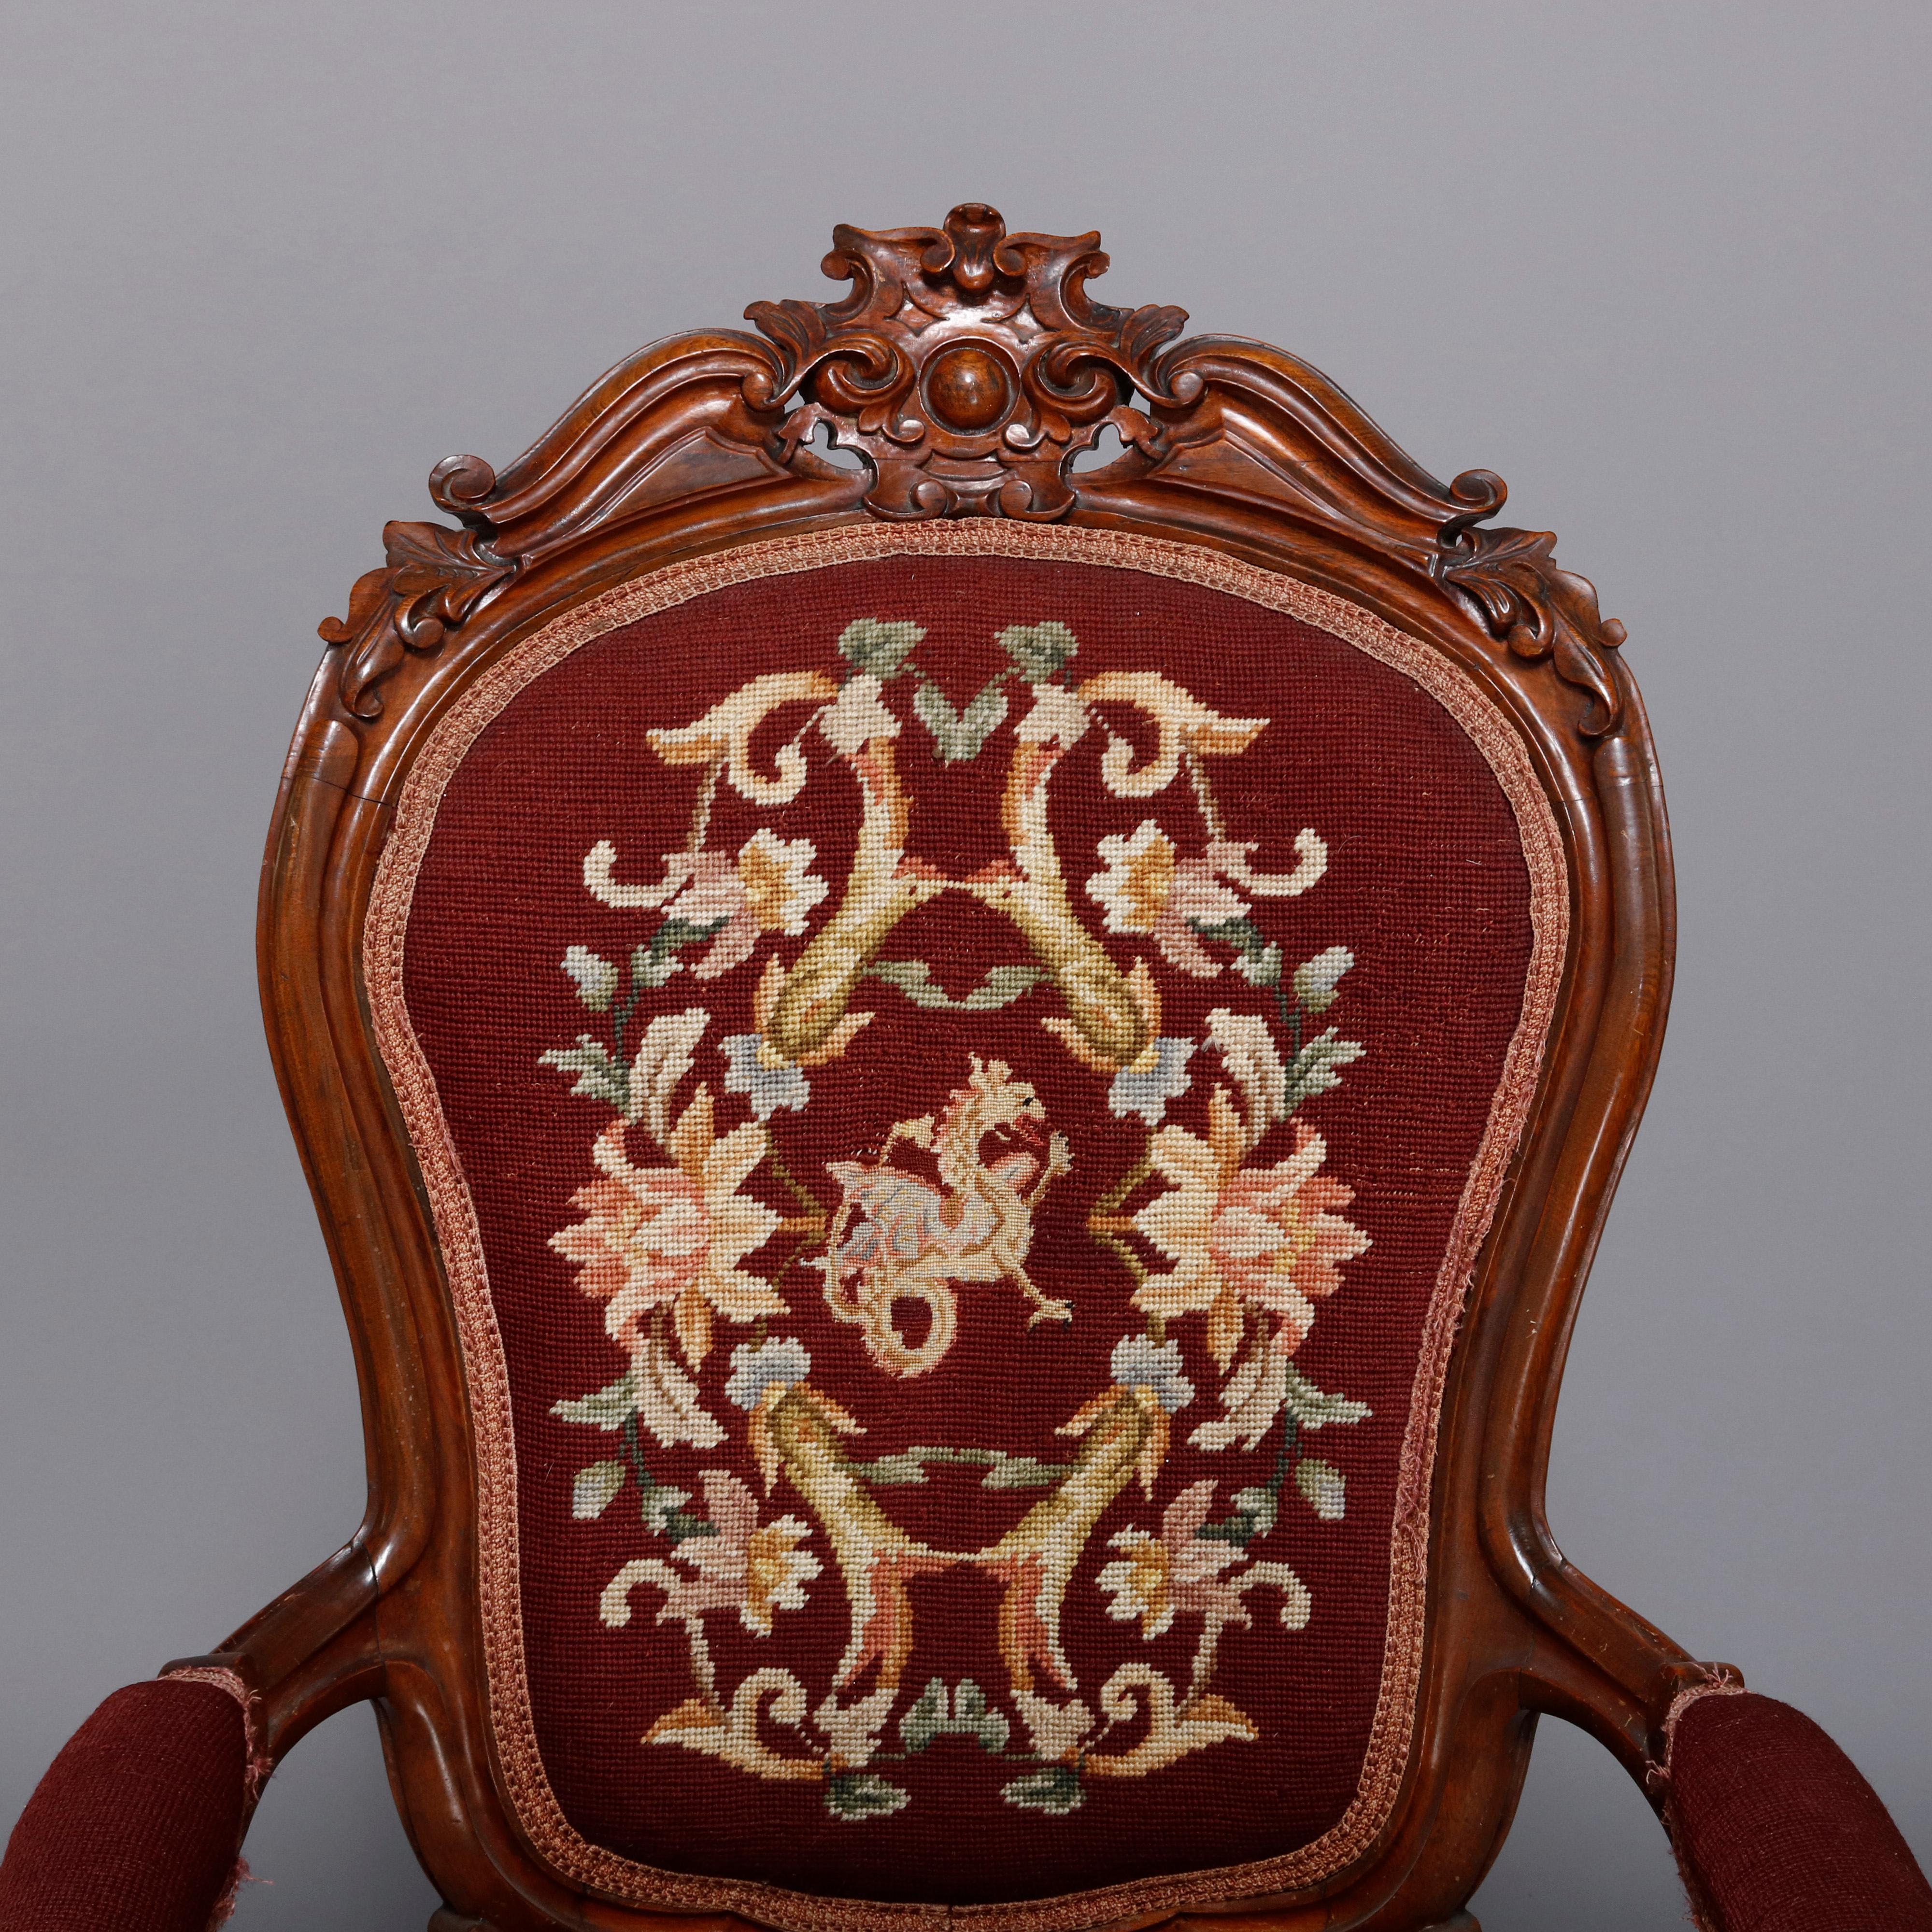 An antique Victorian gentleman's parlor armchair features rosewood frame with deeply carved scroll and foliate crest surmounting shield form back having floral needlepoint upholstery, covered arms and matching seat, raised on cabriole legs, circa